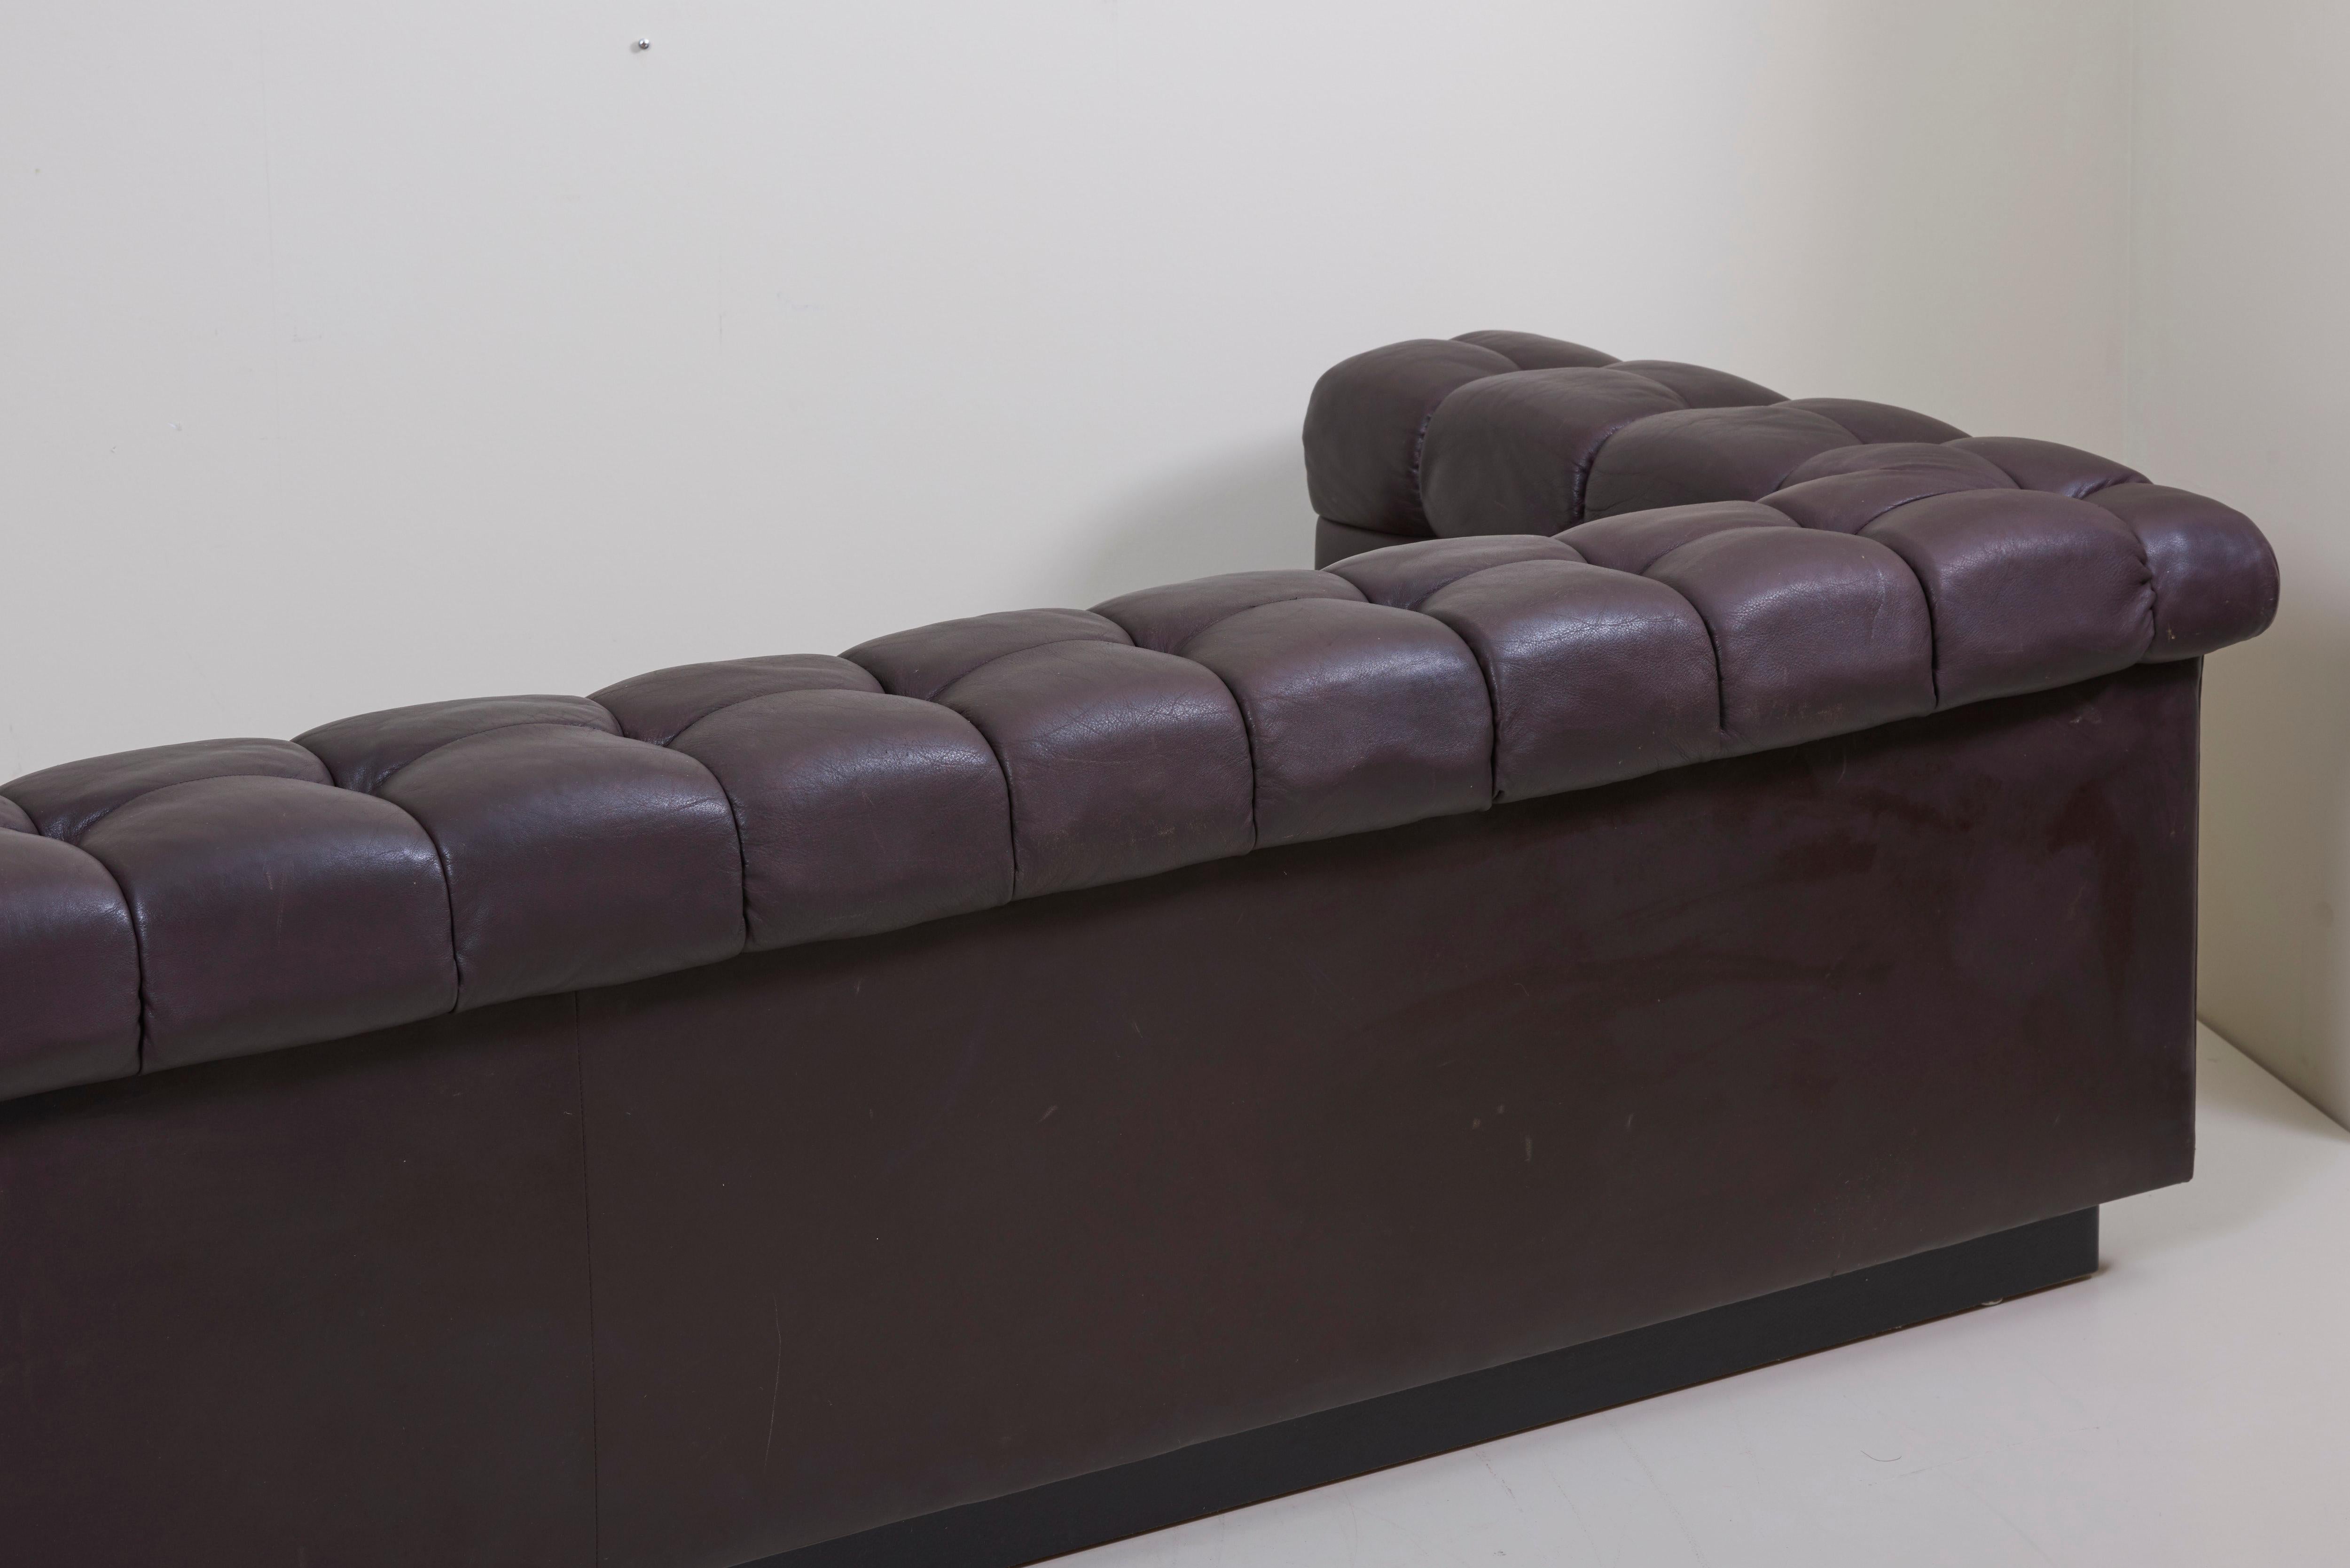 Party Sofa Model 5407 in Dark Brown Leather by Edward Wormley for Dunbar 6